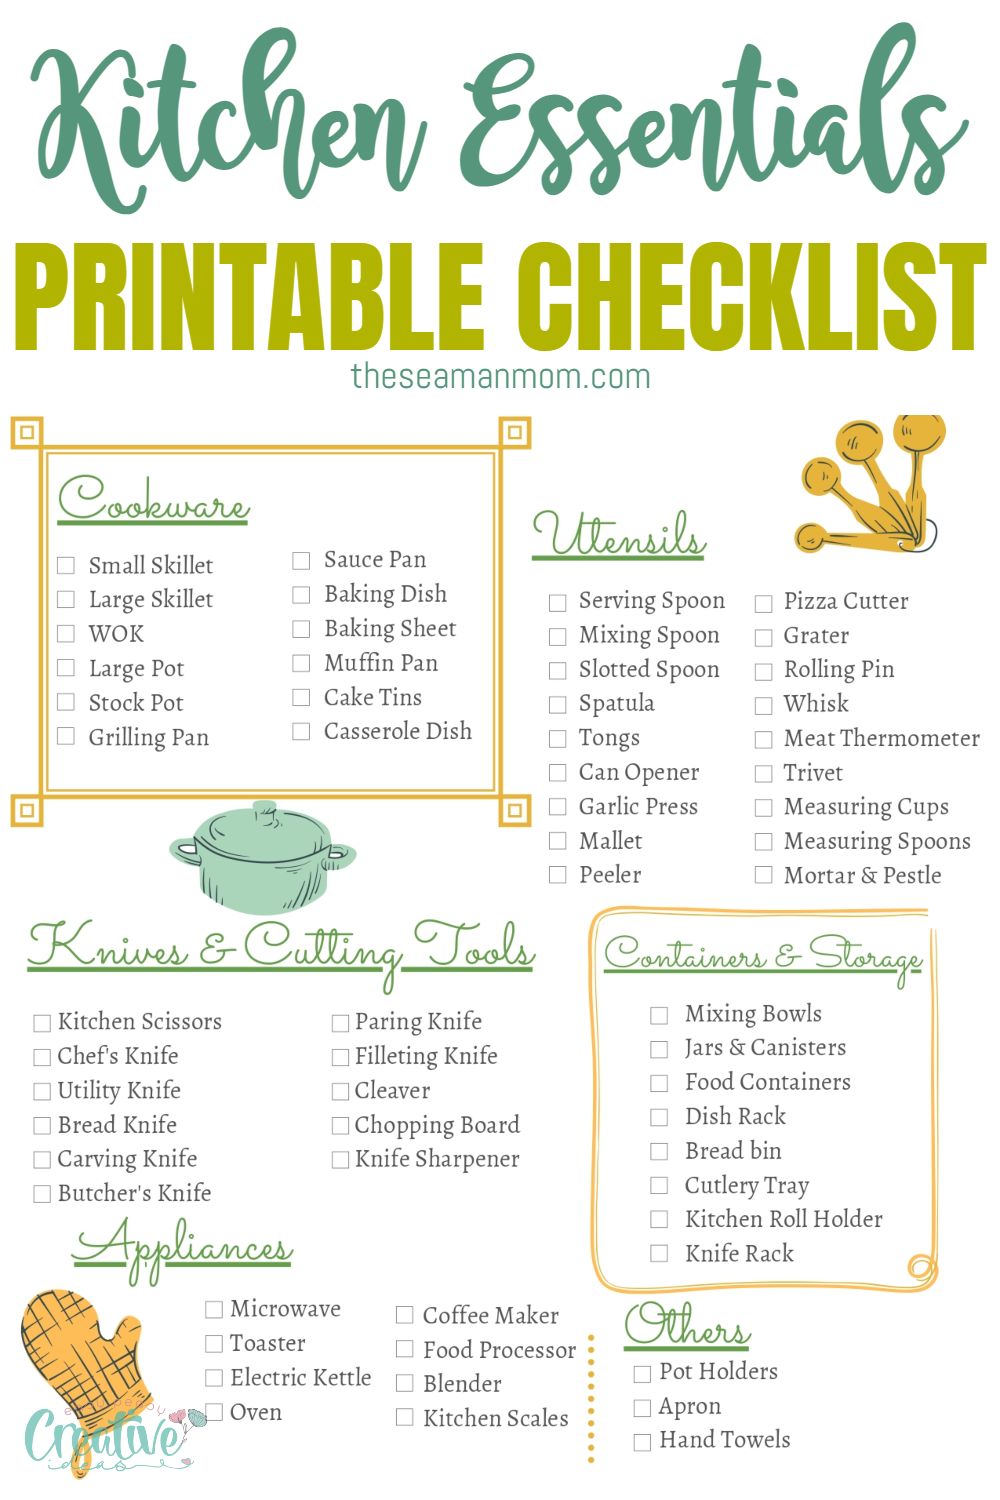 Printable kitchen essentials checklist of of must-have items for your convenience.